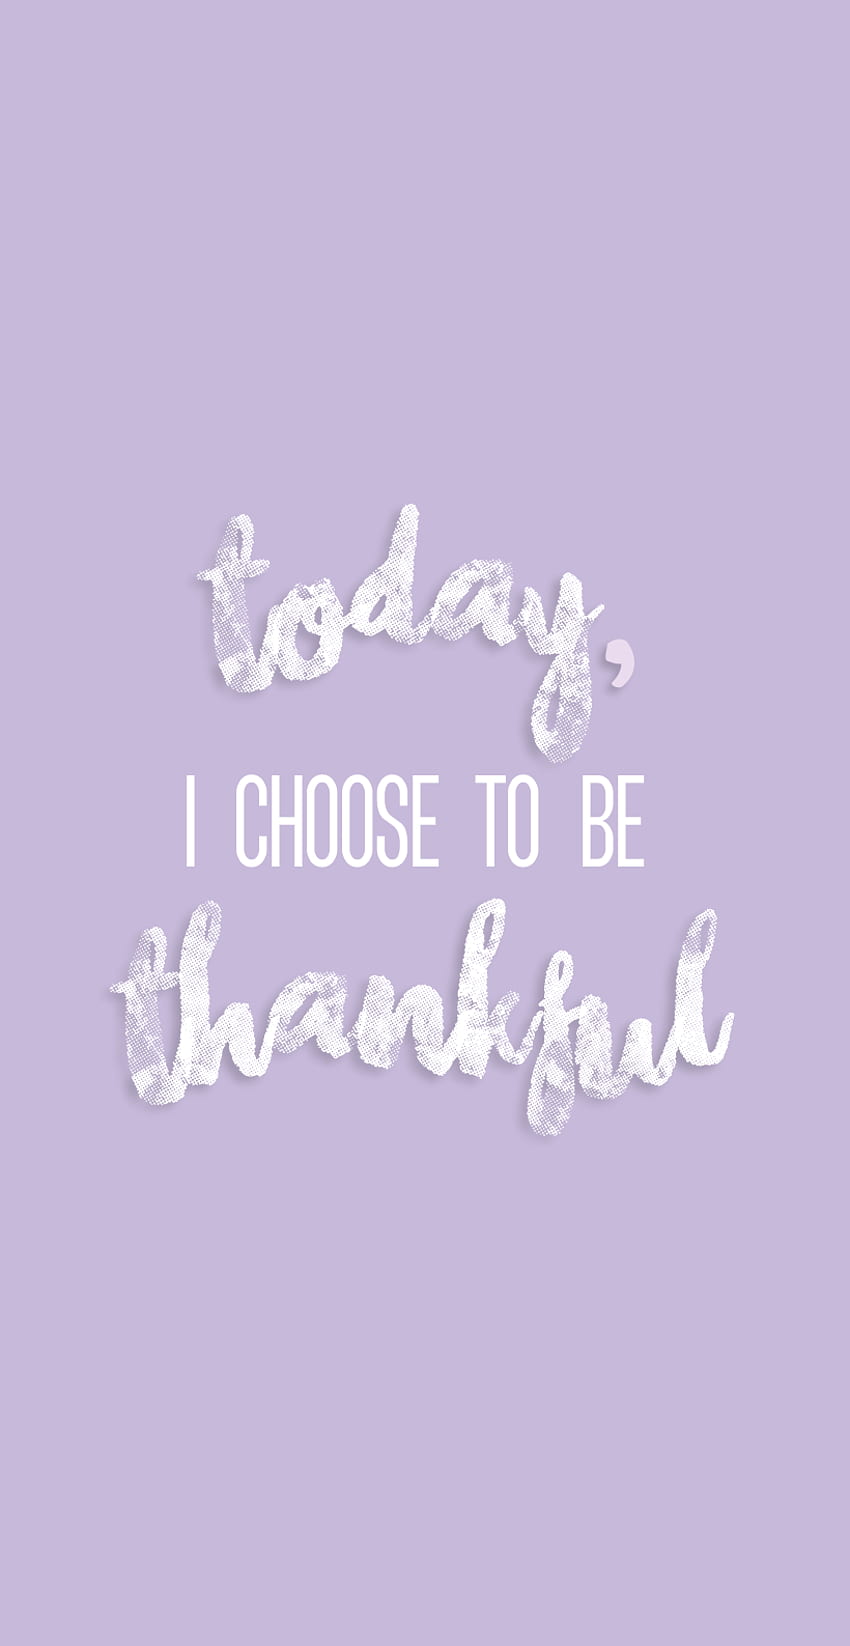 Today i choose to be thankful - Purple quotes